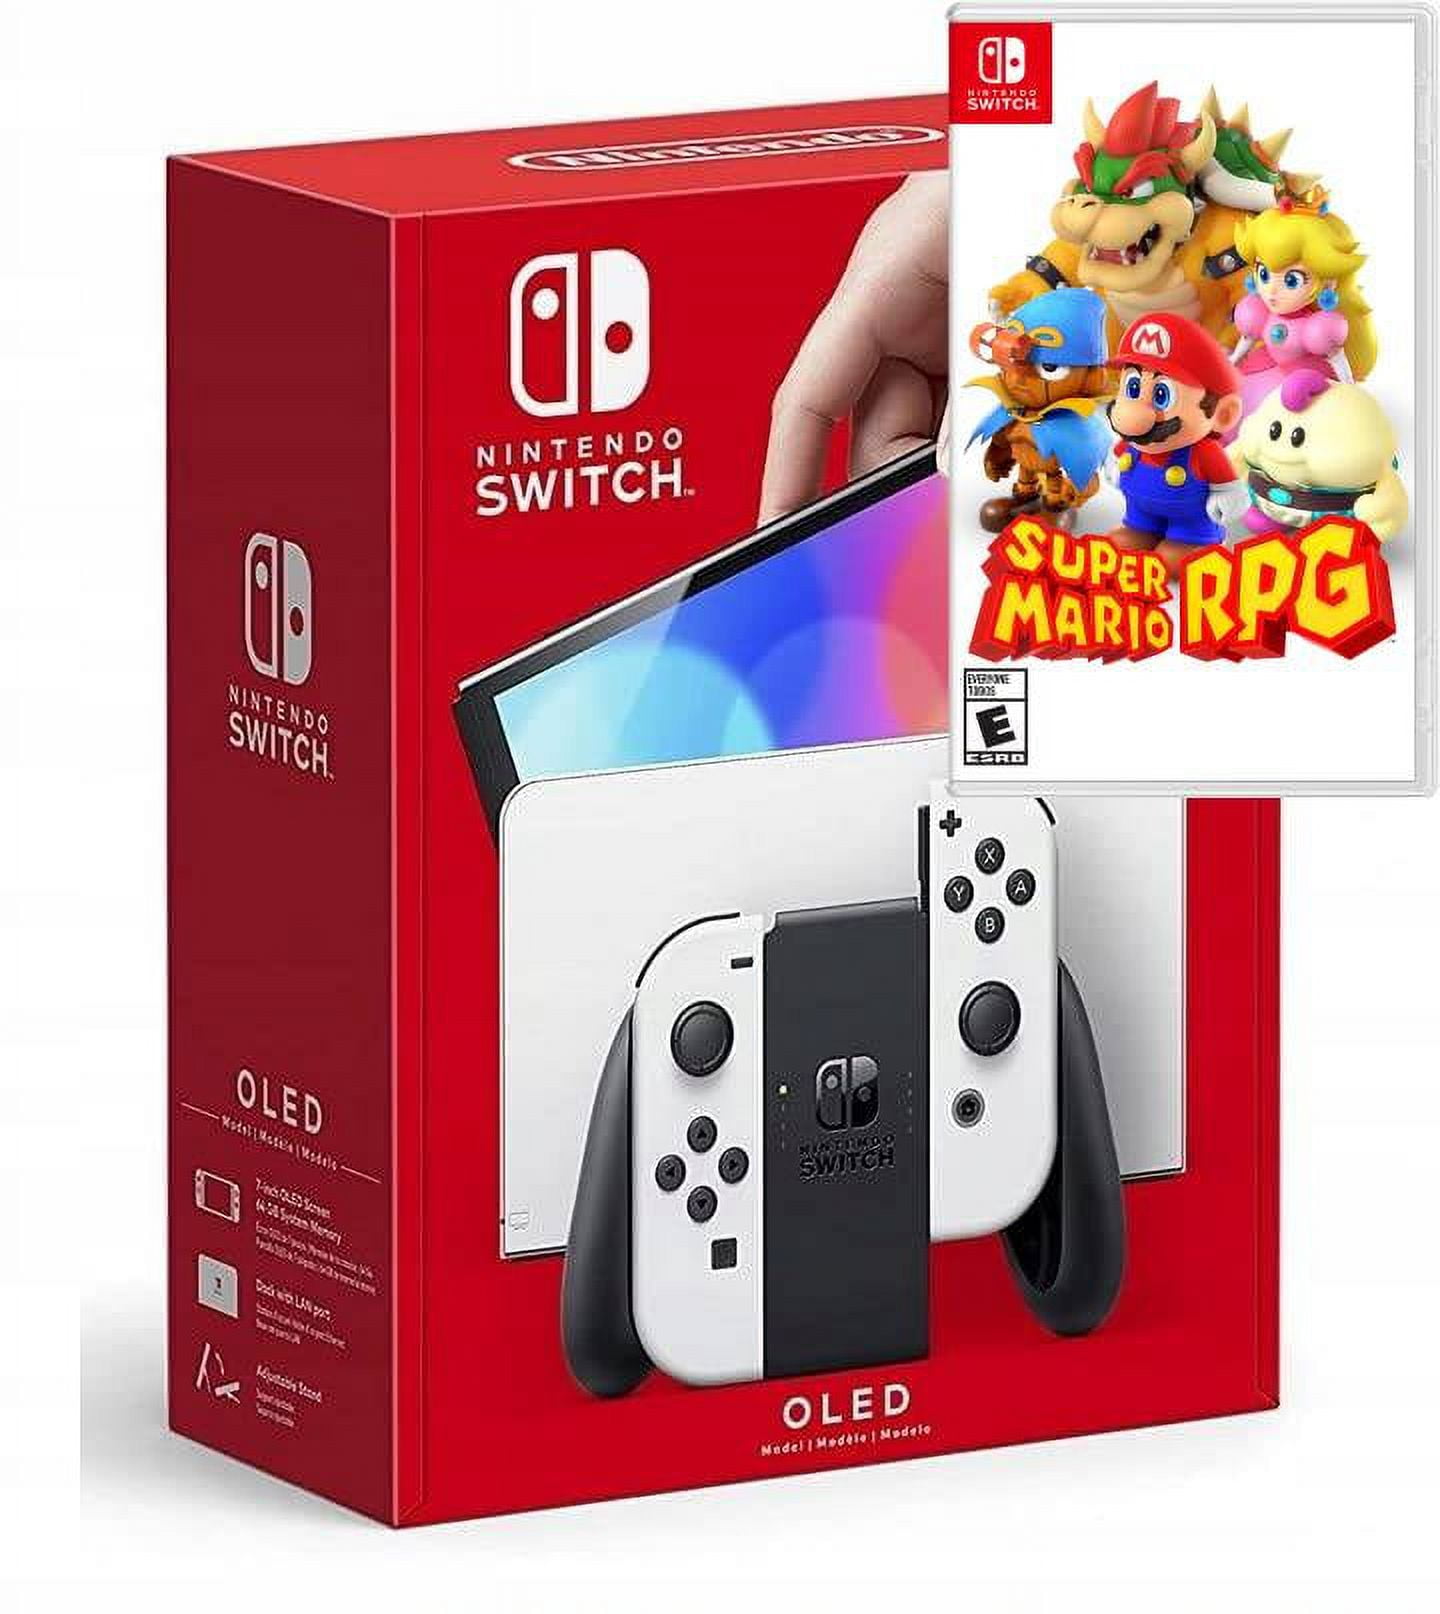 Nintendo Switch OLED Model with Red Plug Game RPG Mario NEW Limited US Edition Import with Super - w/ Bundle 